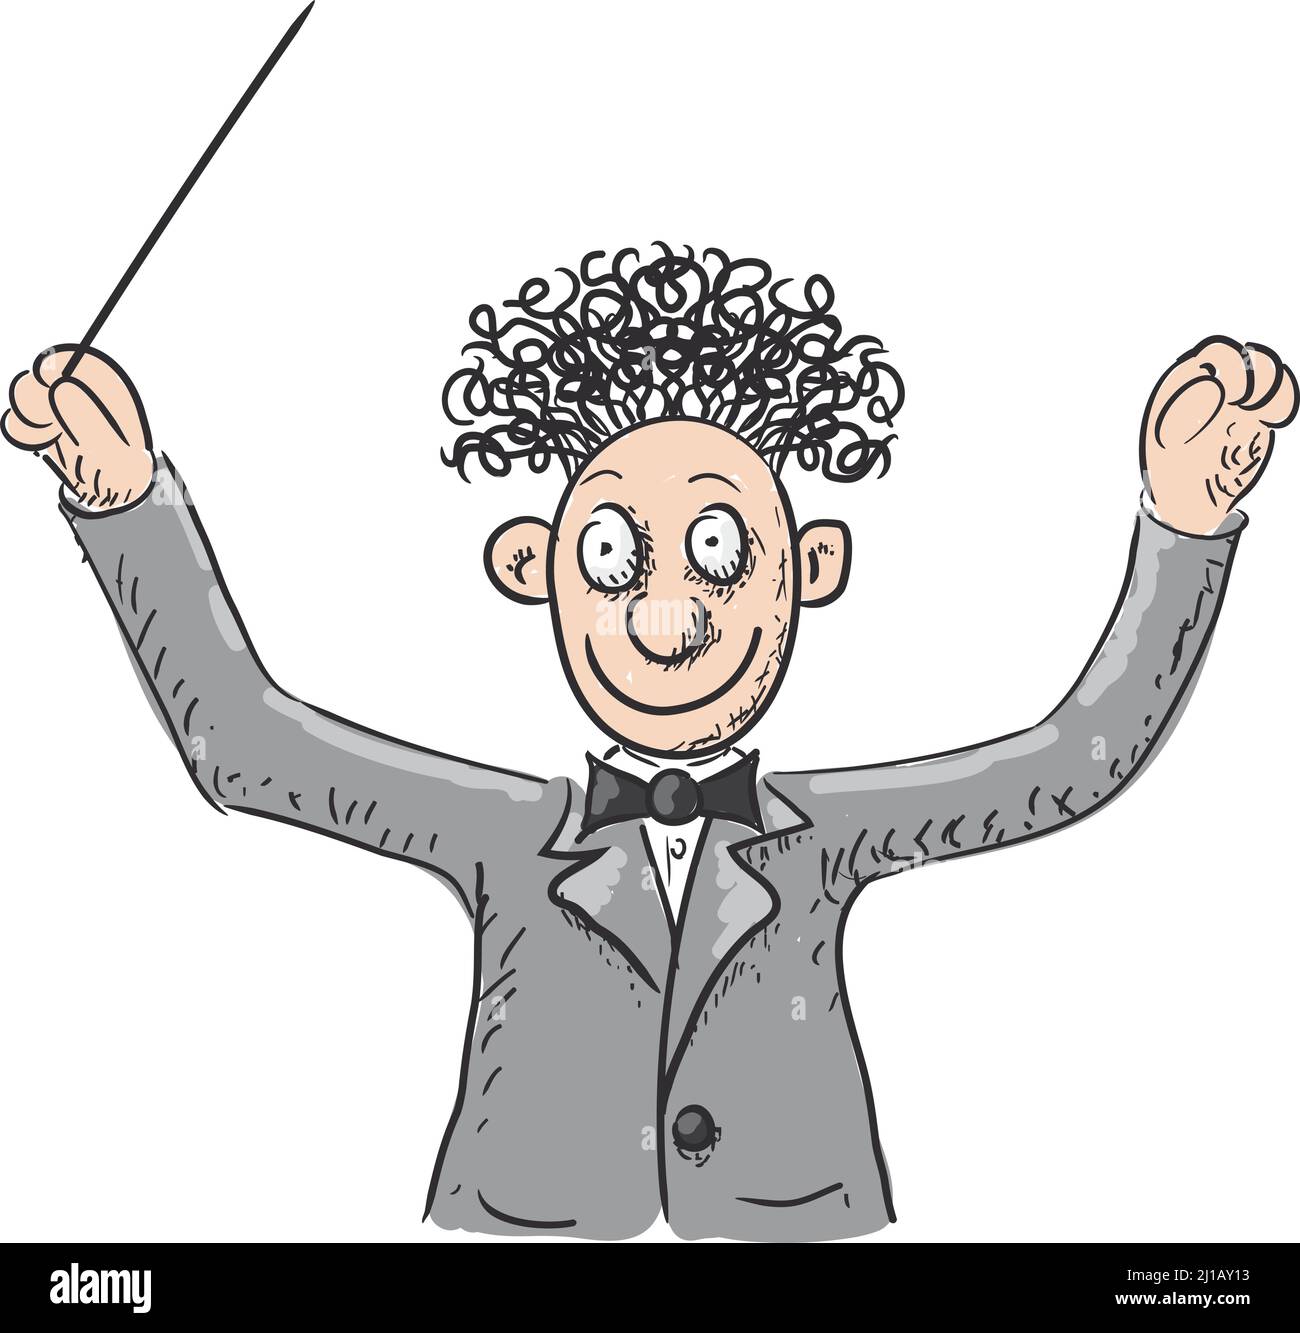 Orchestra conductor, vector illustration drawing Stock Vector Image